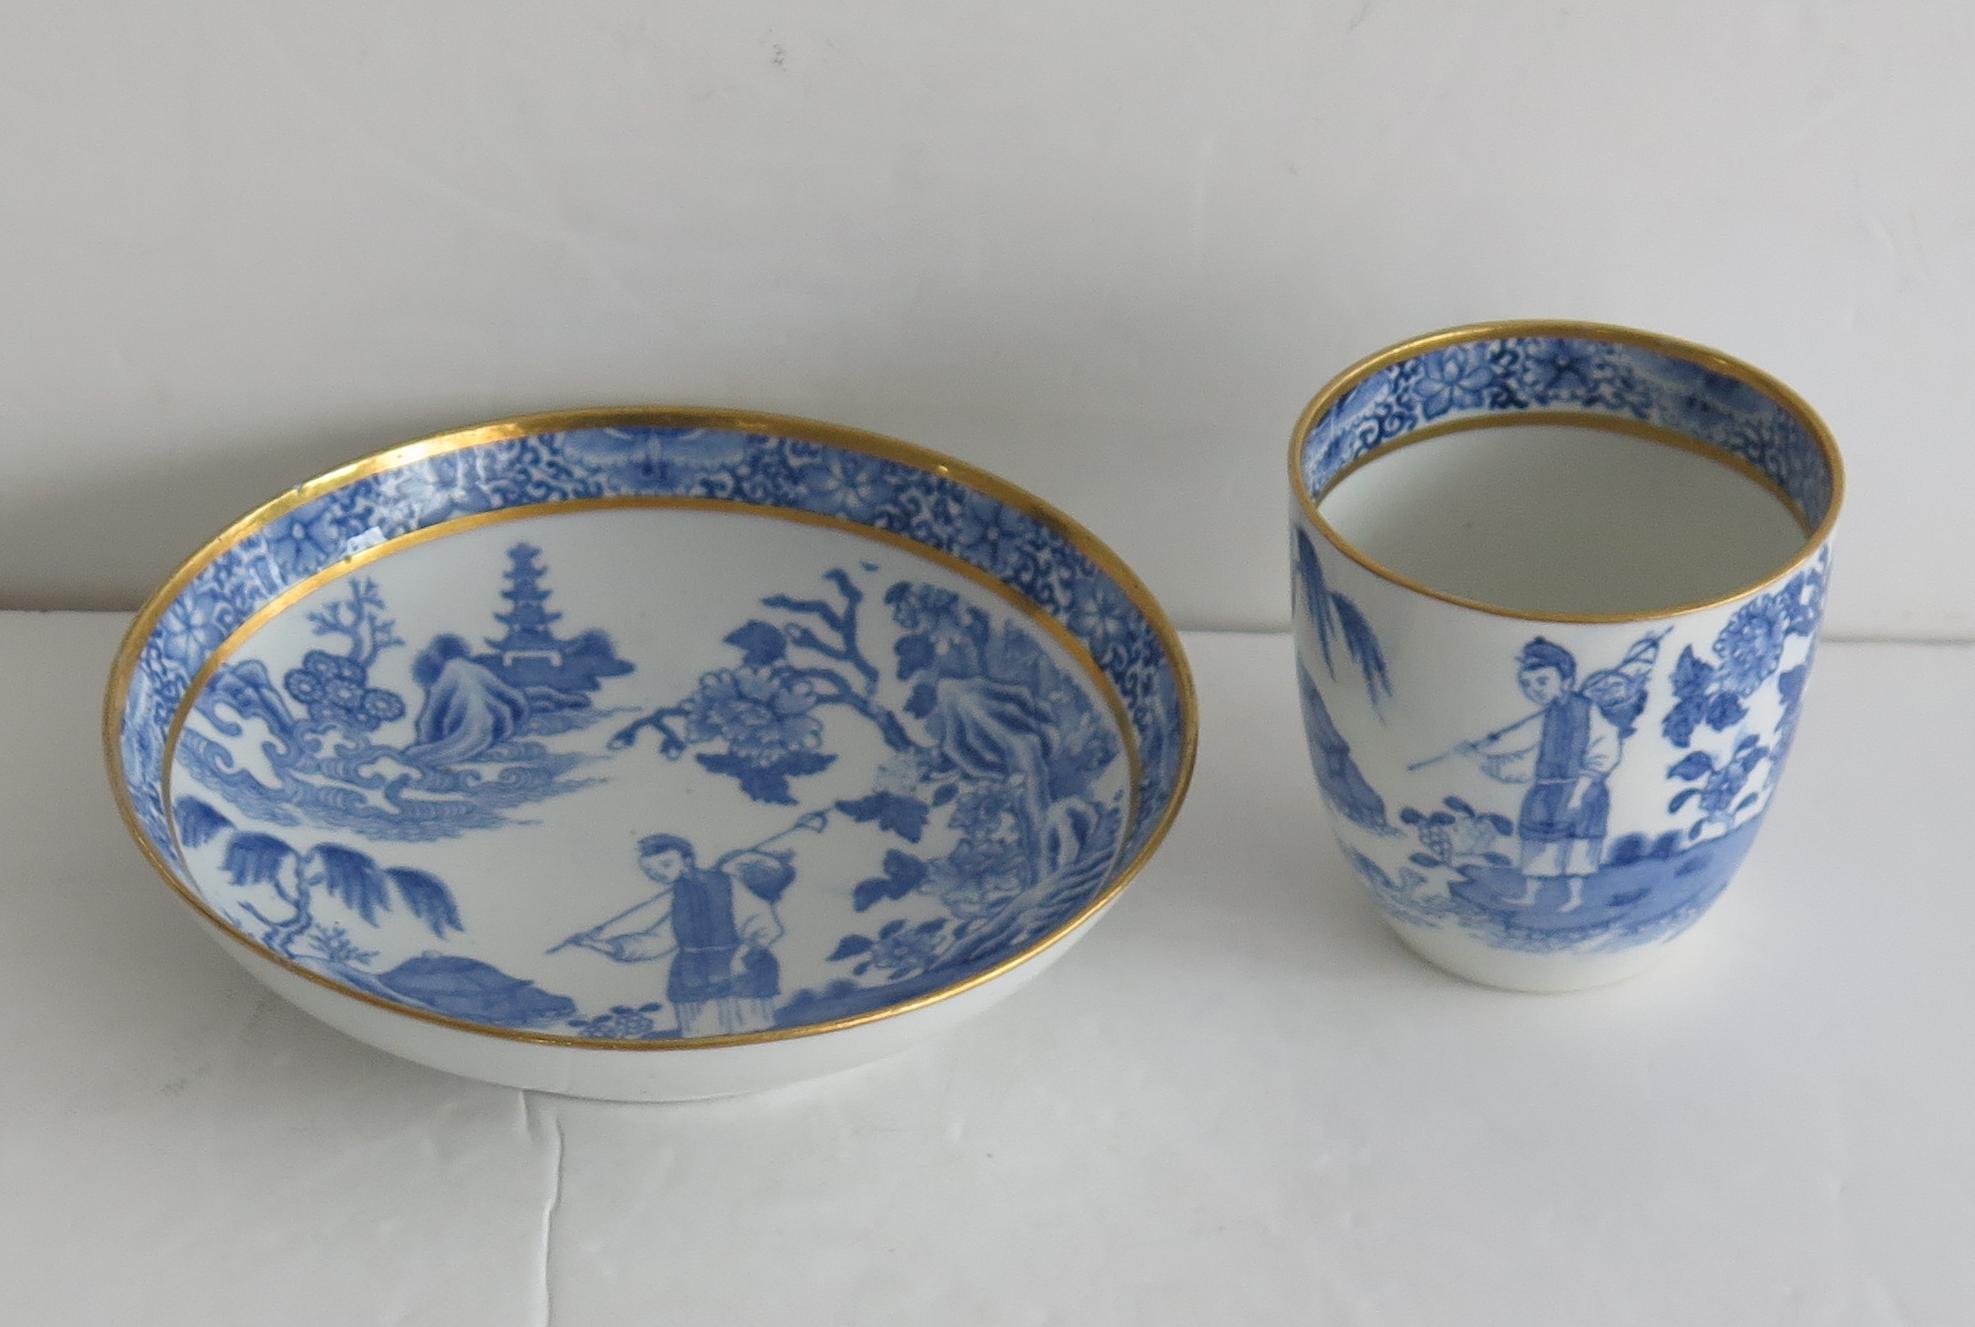 Chinoiserie Rare John Turner Porcelain Cup and Saucer in Traveller Pattern, circa 1795 For Sale